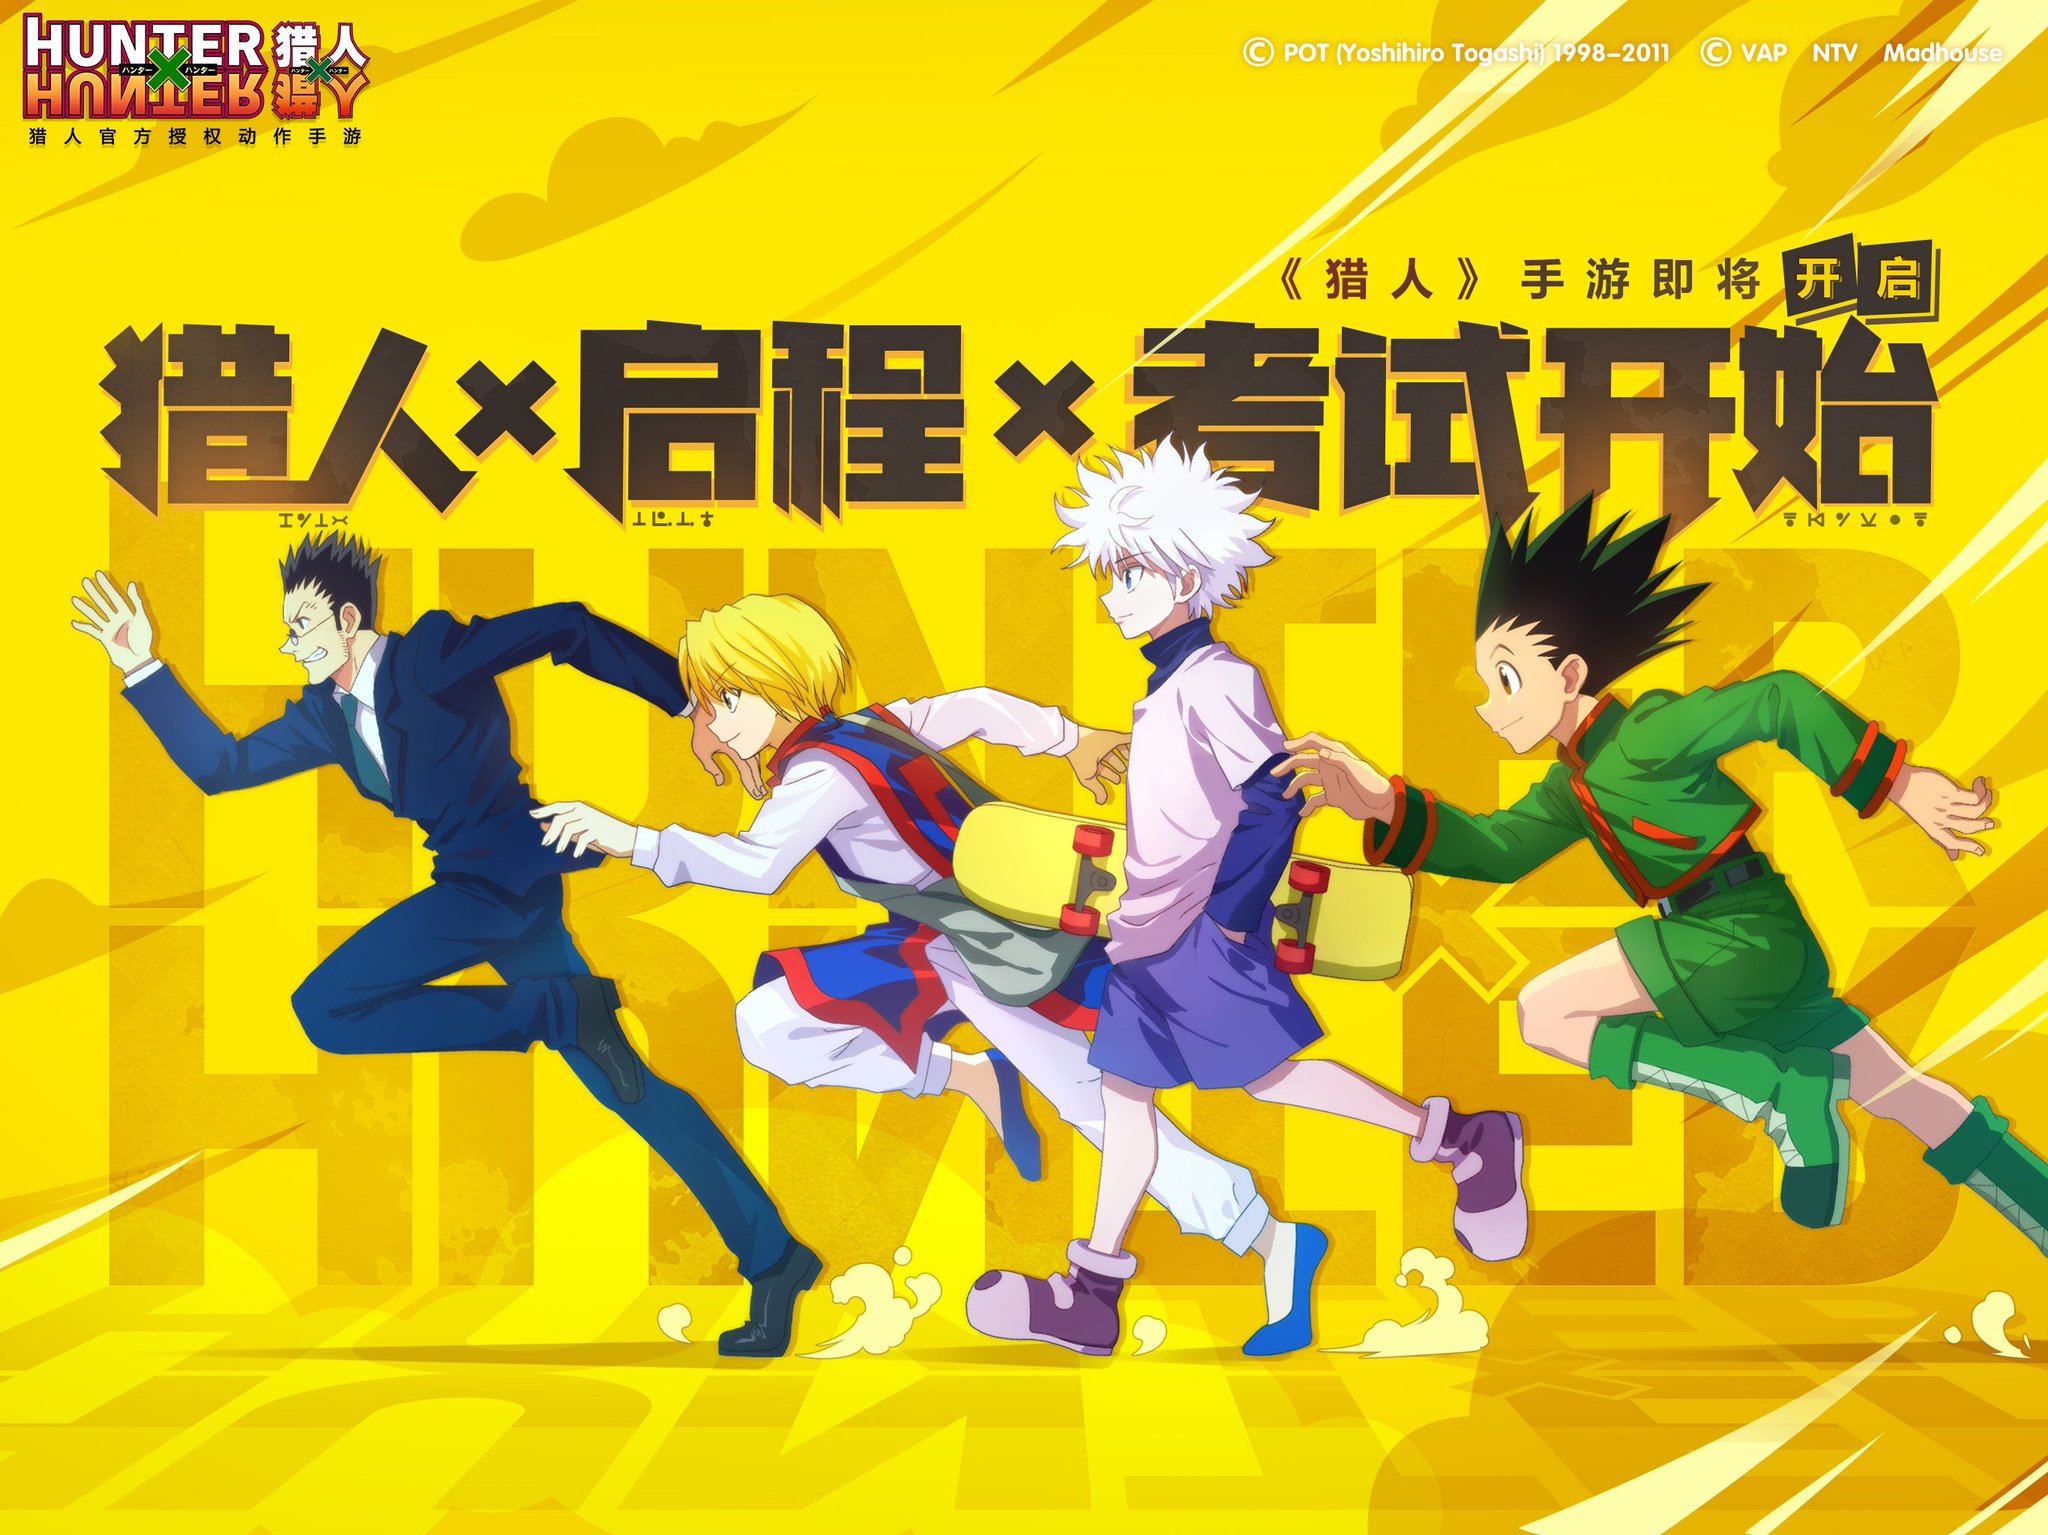 Hunter x Hunter mobile game announced by Tencent and Lantu Games